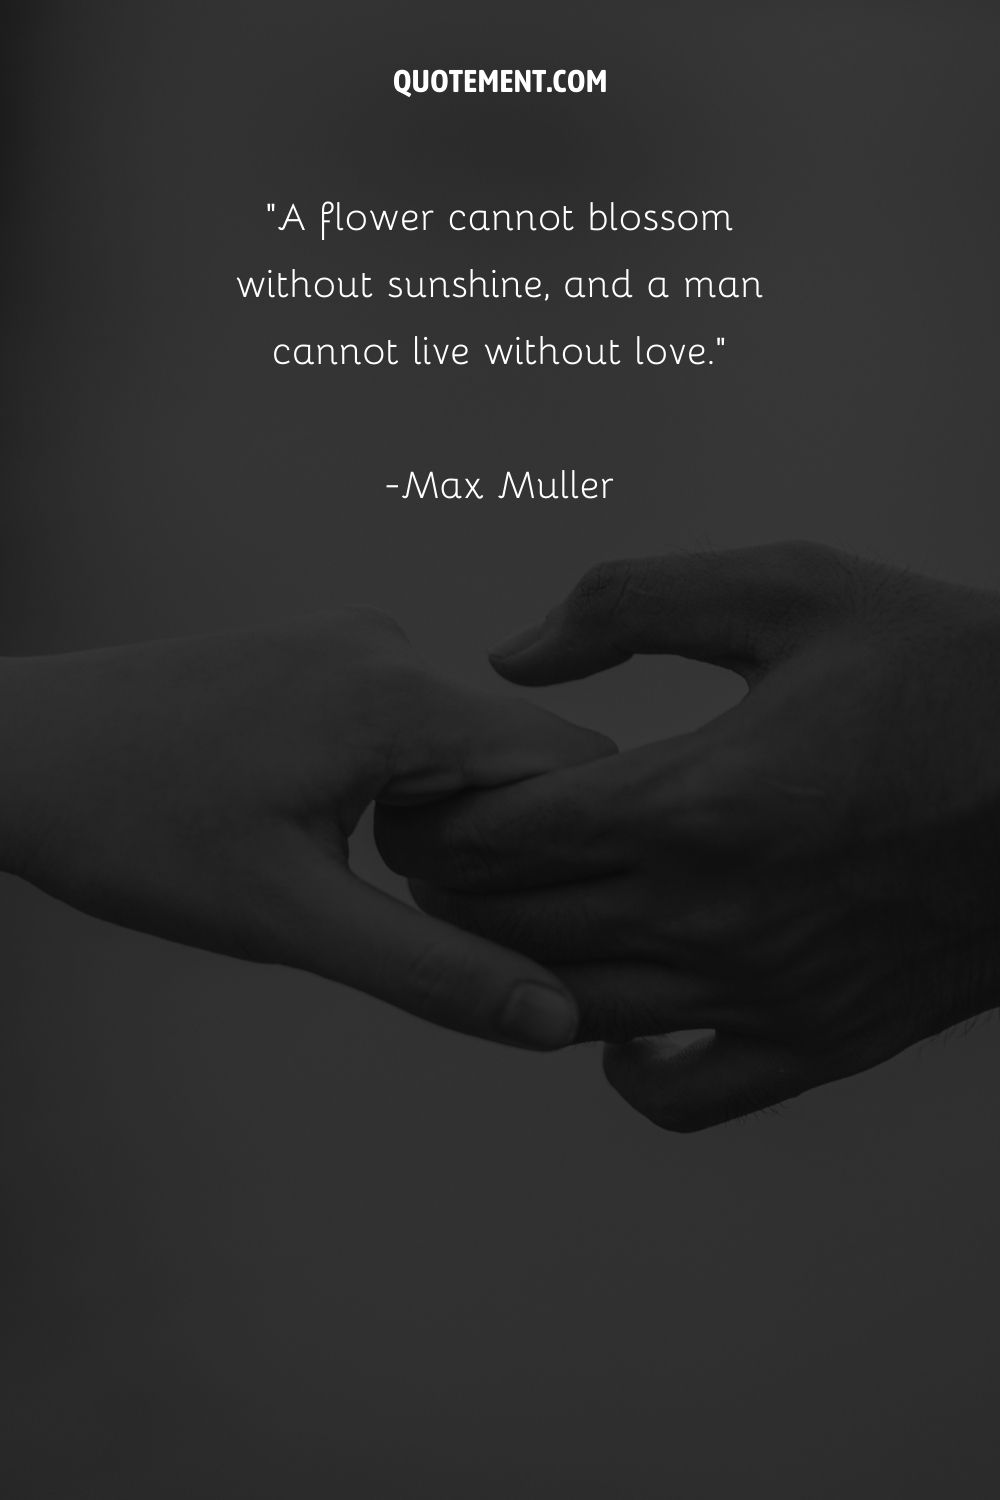 A timeless bond captured in clasped hands representing a quote about love
